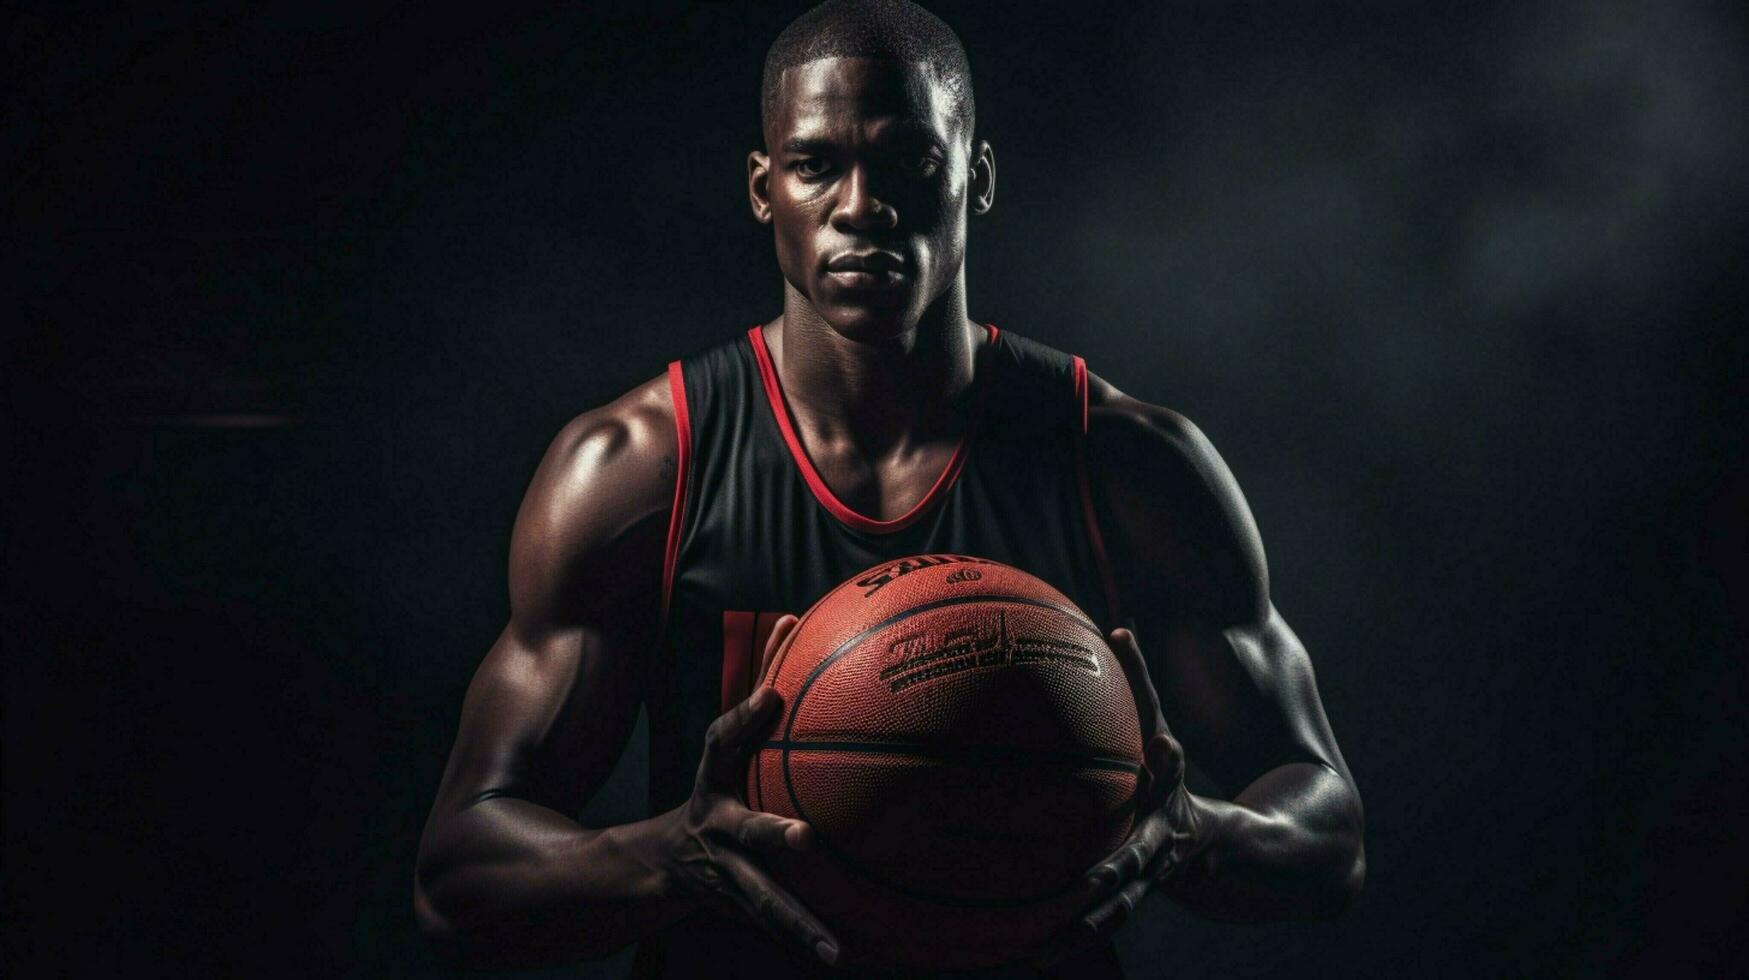 muscular basketball player holding ball with confidence photo